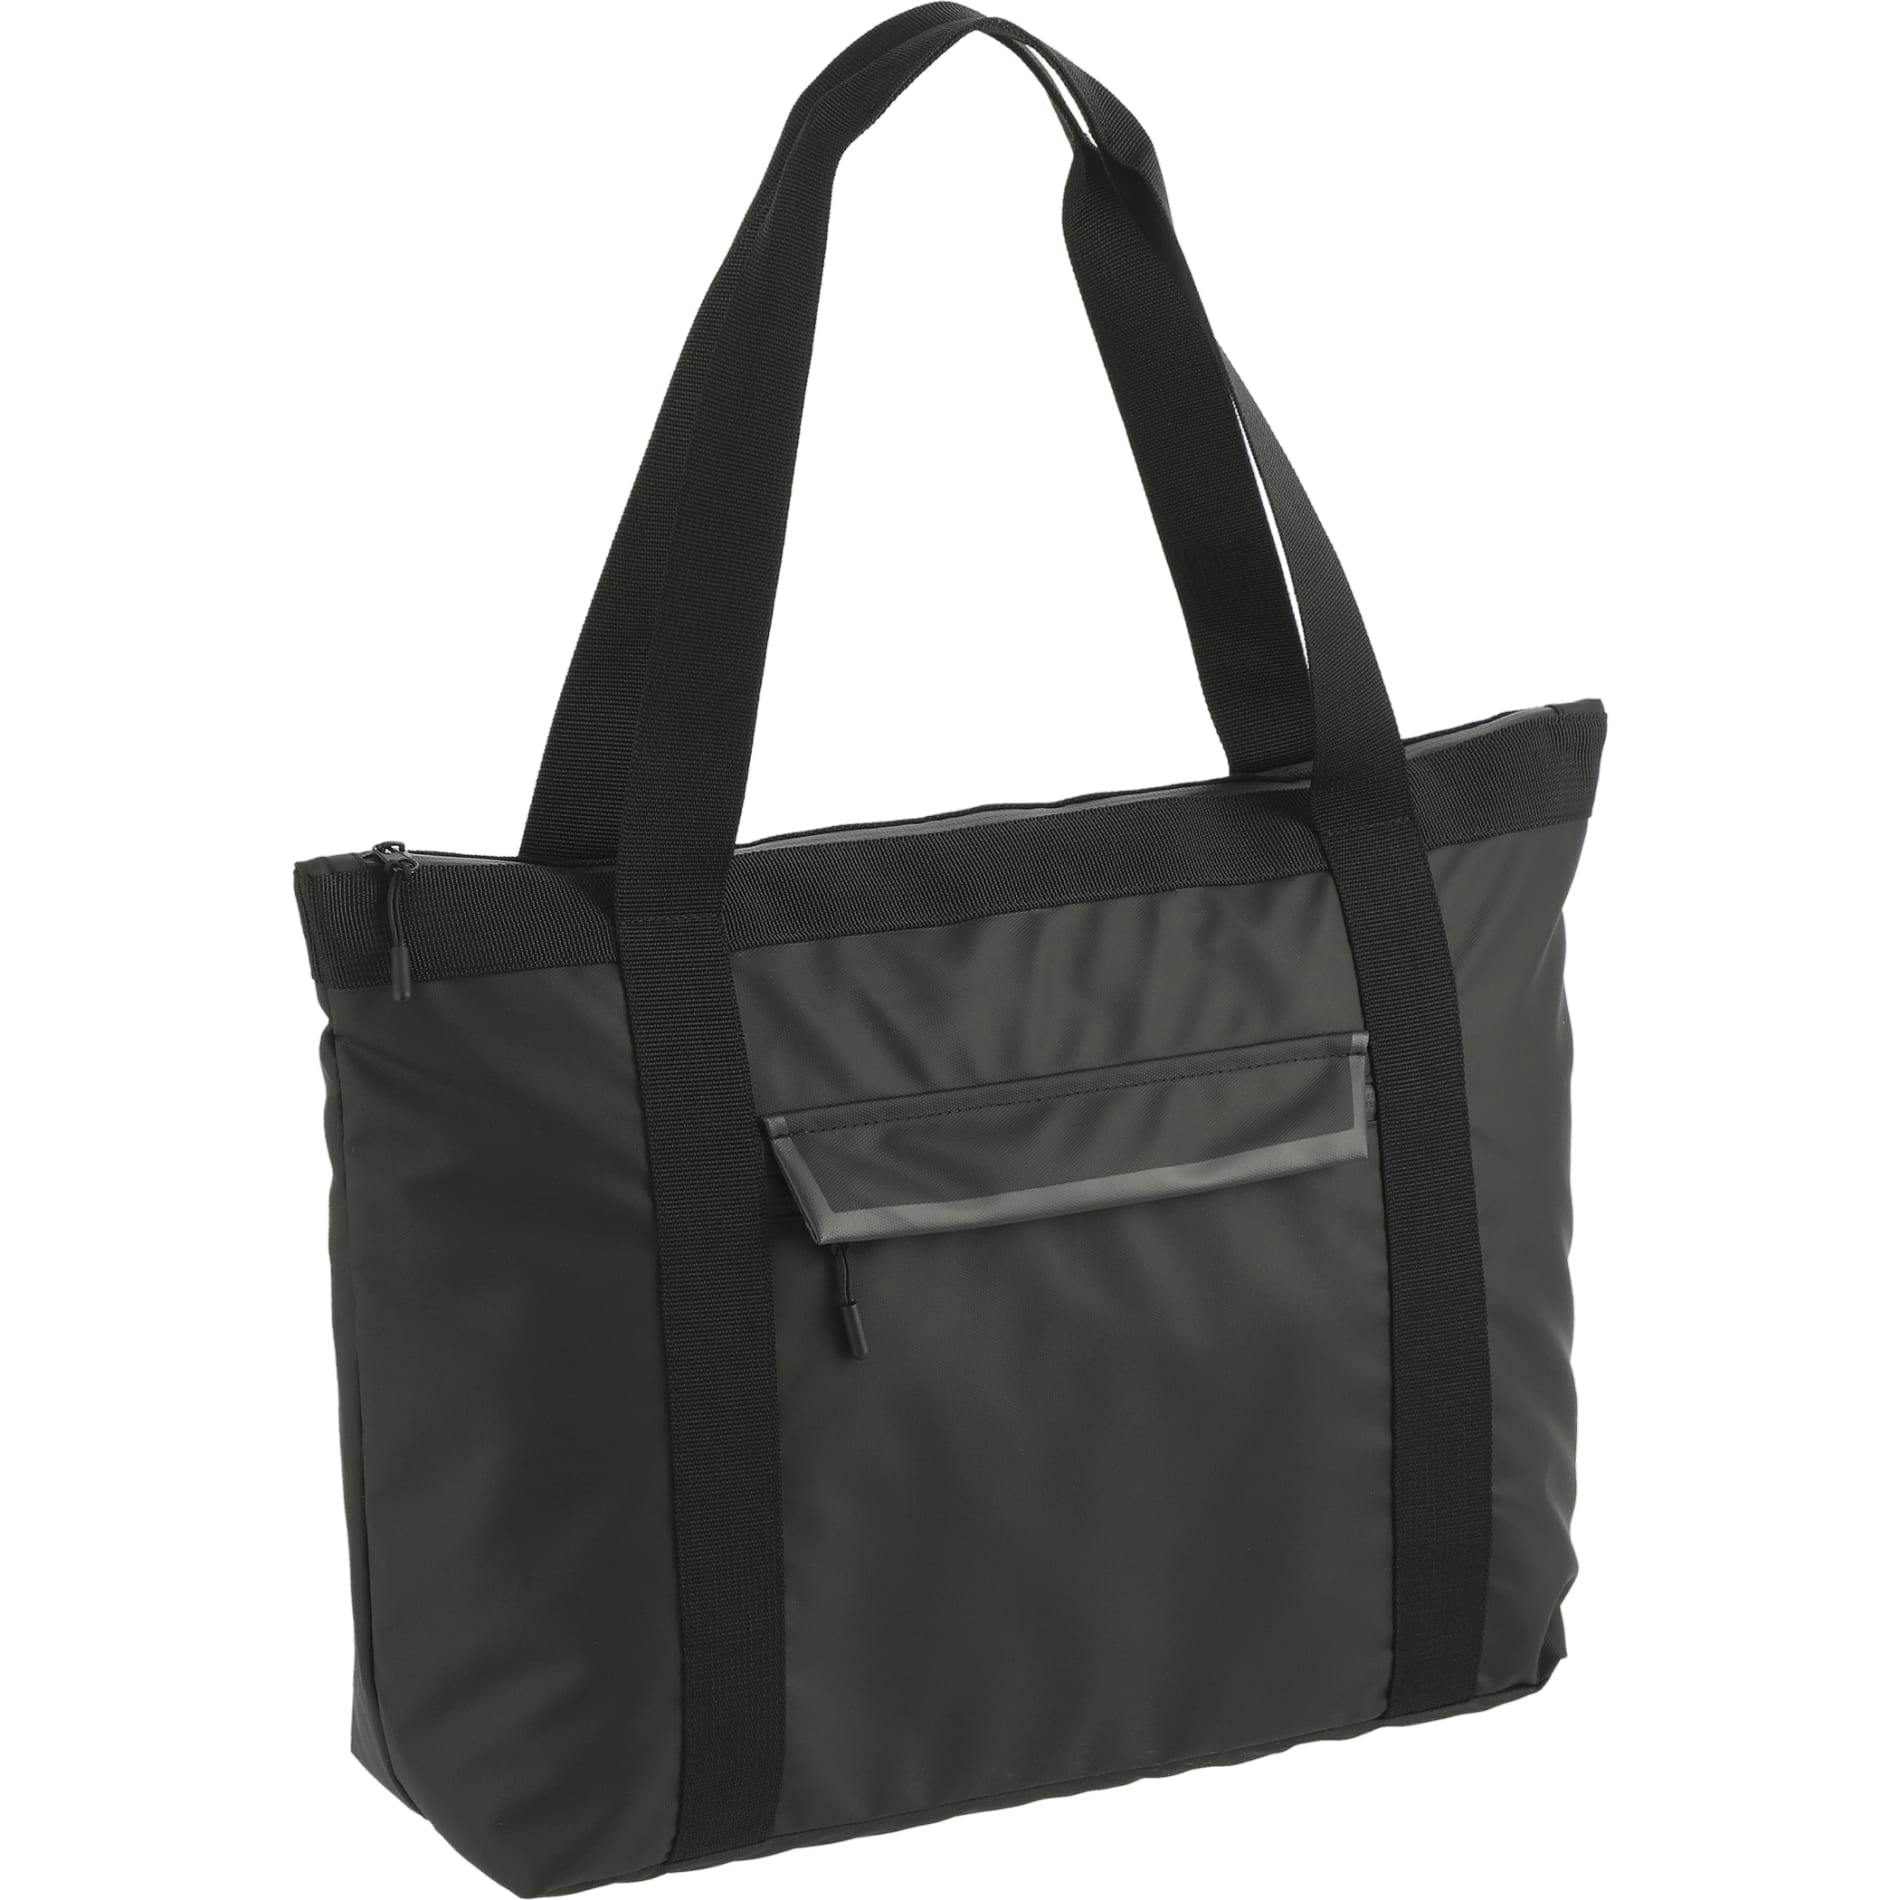 NBN All-Weather Recycled Tote - additional Image 3